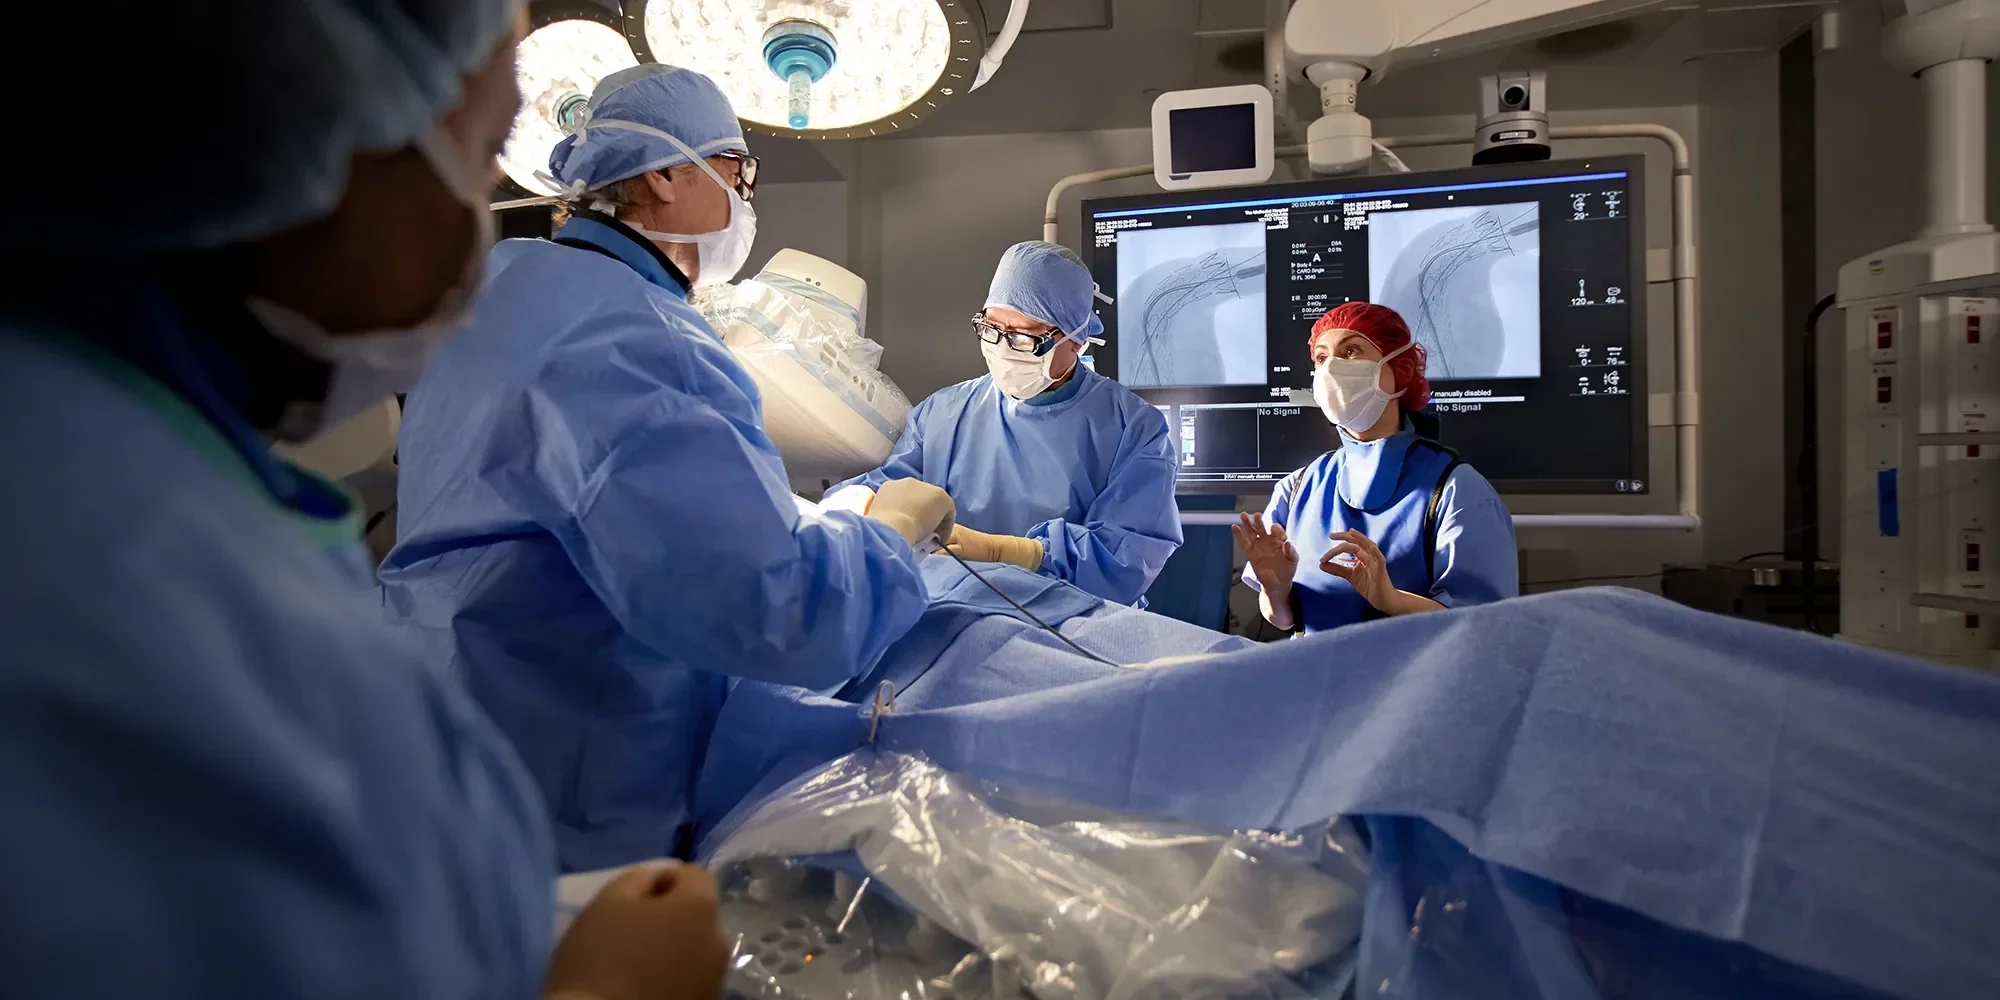 People in an operating room.